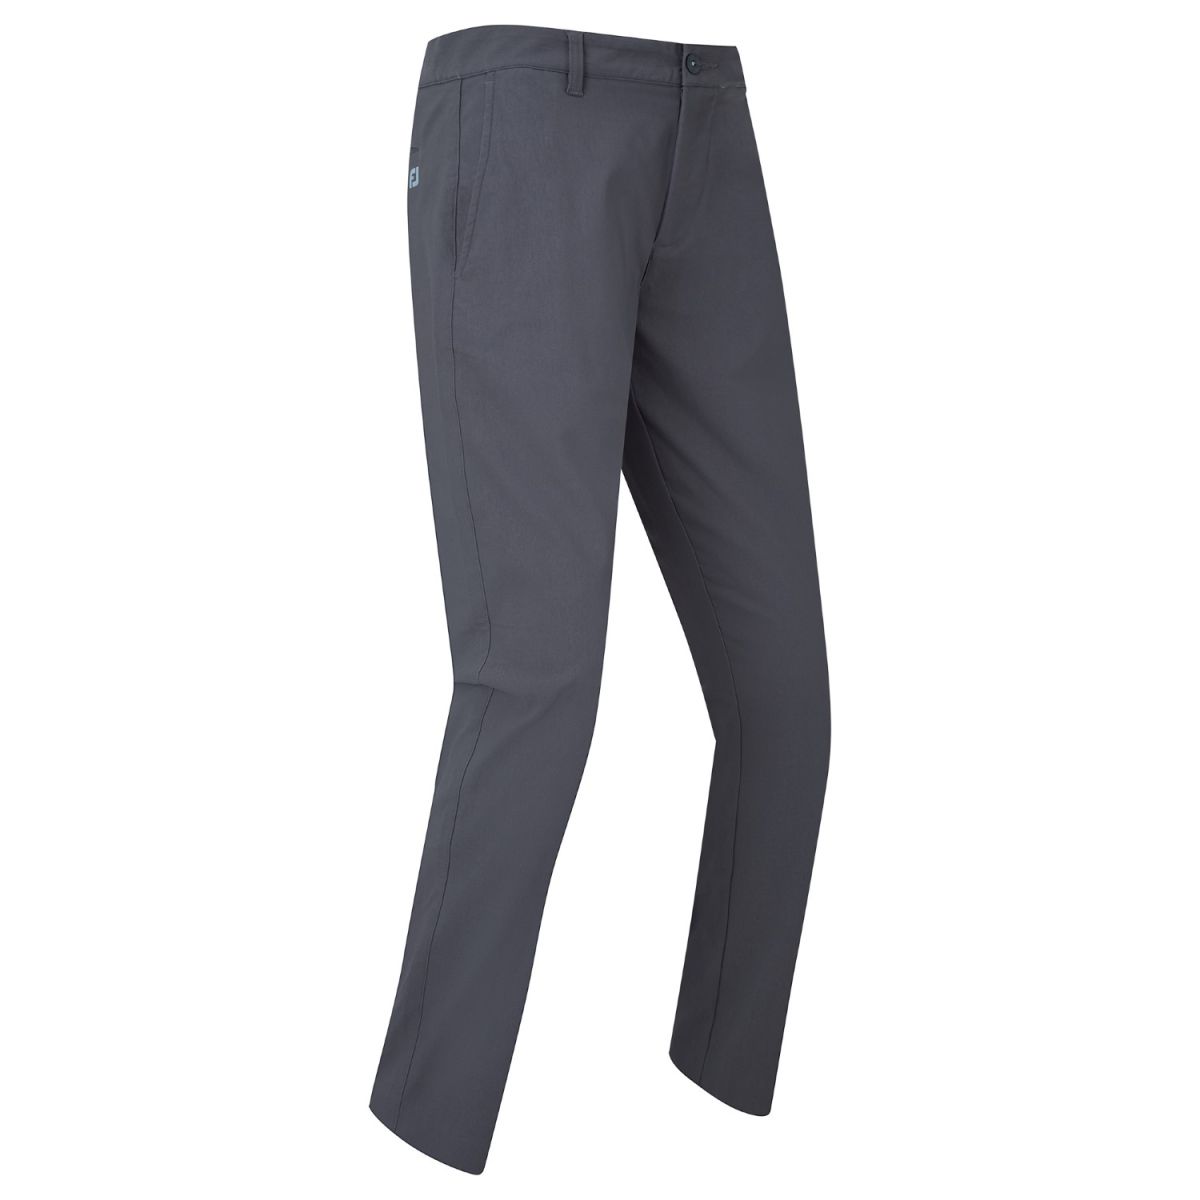 fj pant thermoseries charcoal 3032